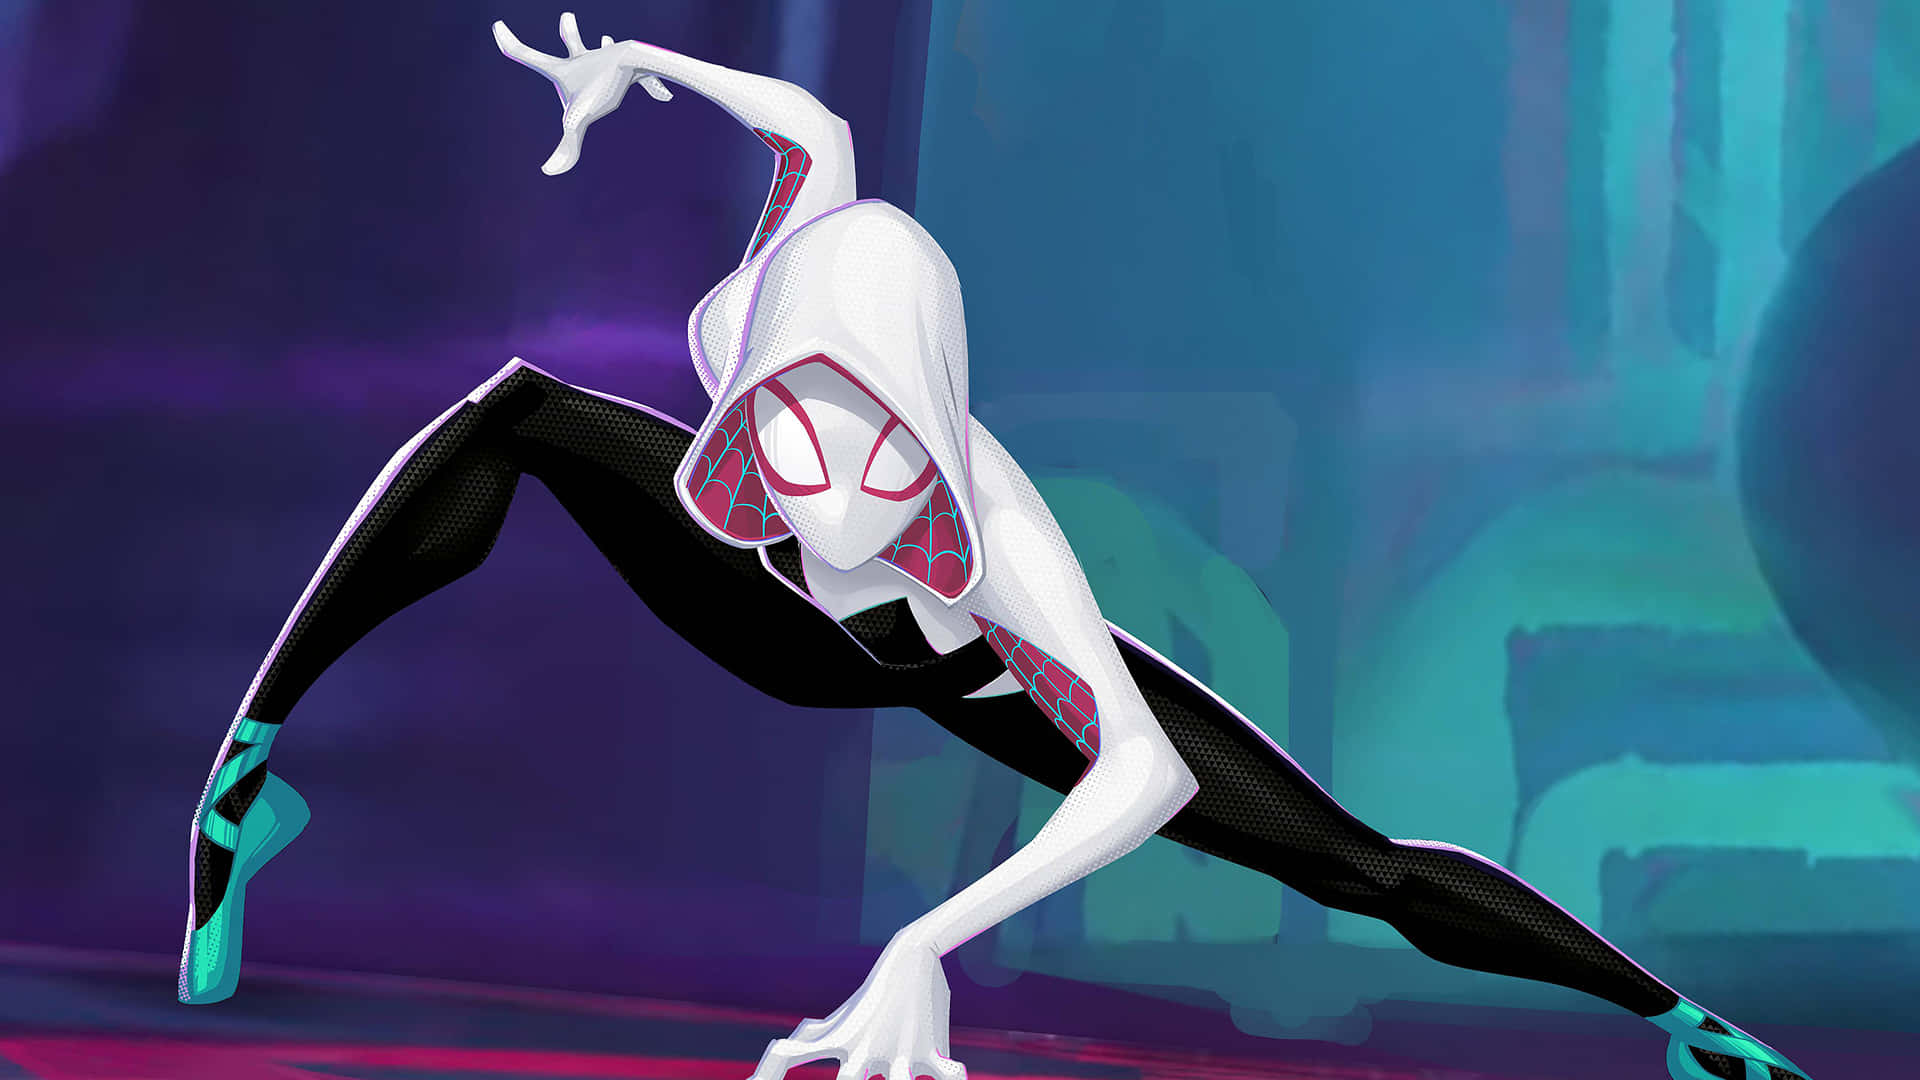 Gwen Stacy in action on the cityscape background Wallpaper